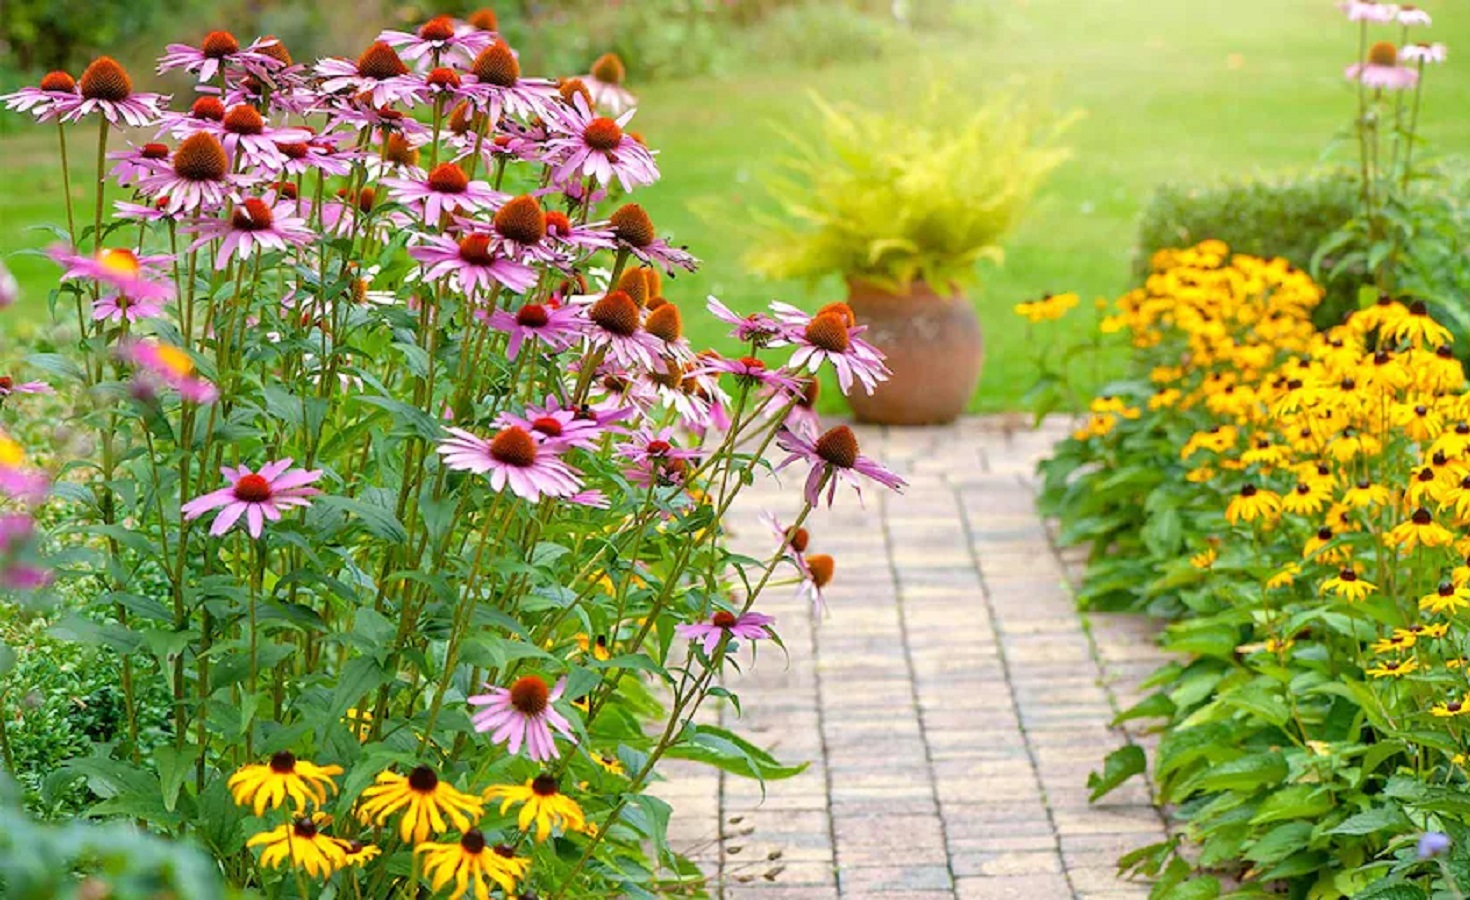 How to Care for Coneflowers? Learn About Rudbeckia Varieties